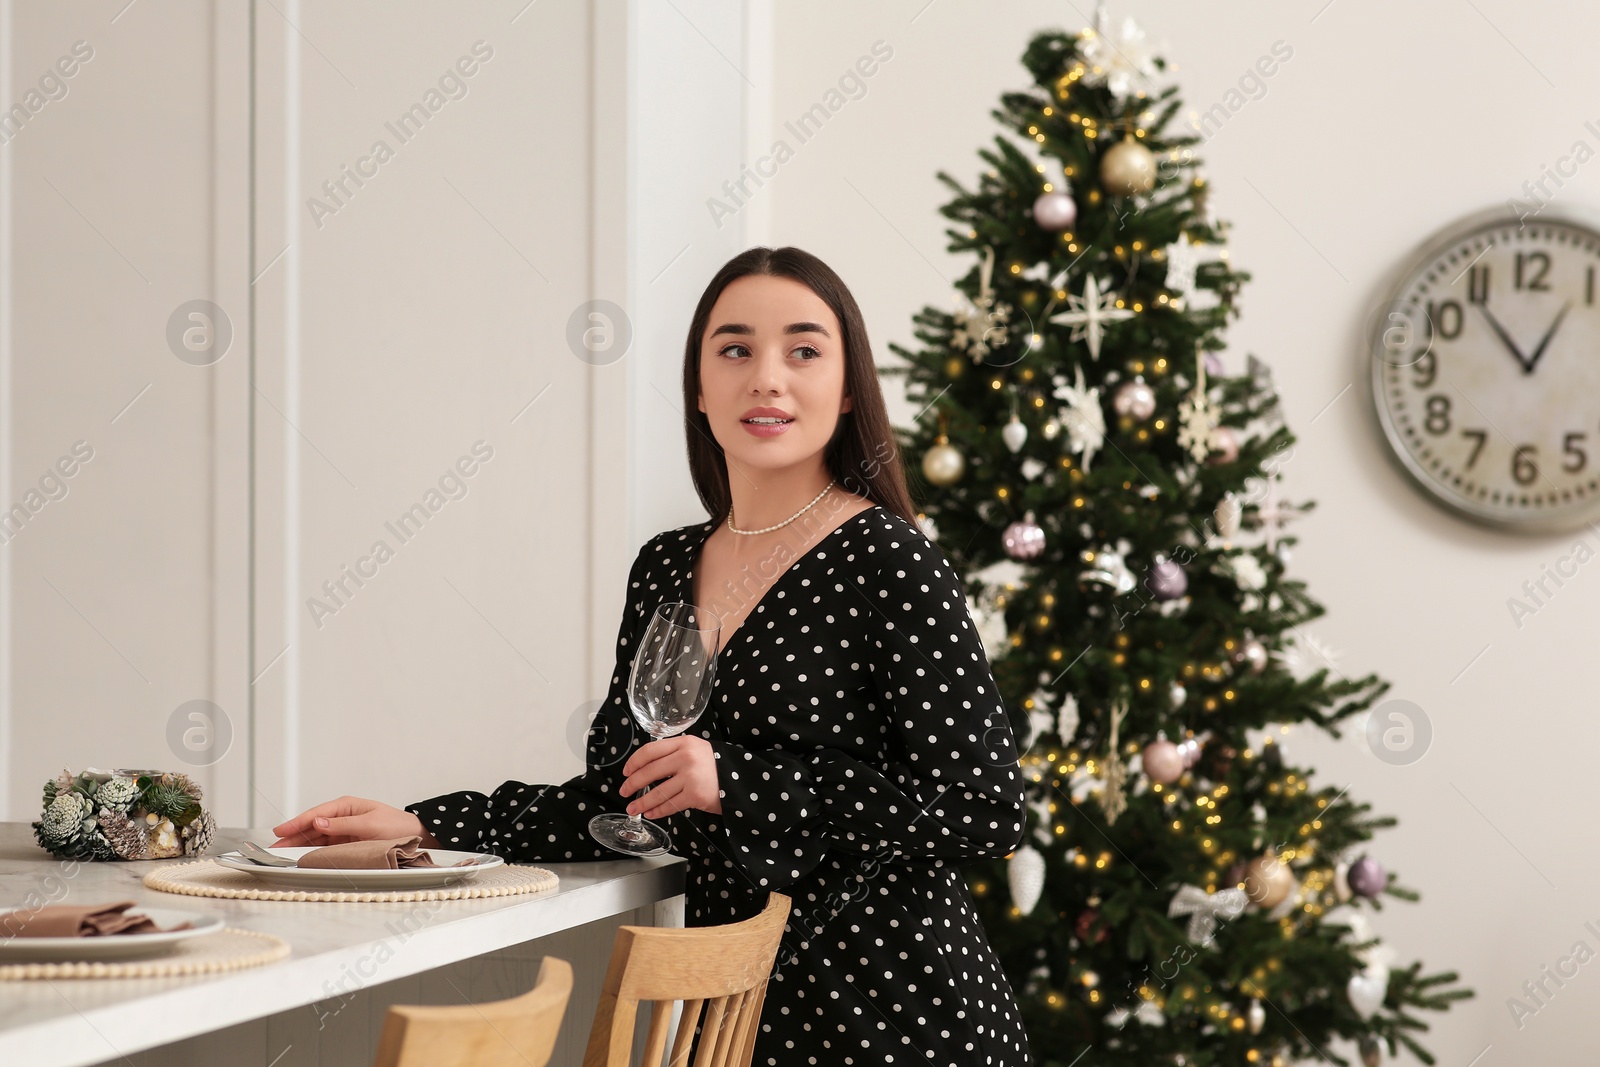 Photo of Beautiful woman serving table for Christmas in kitchen